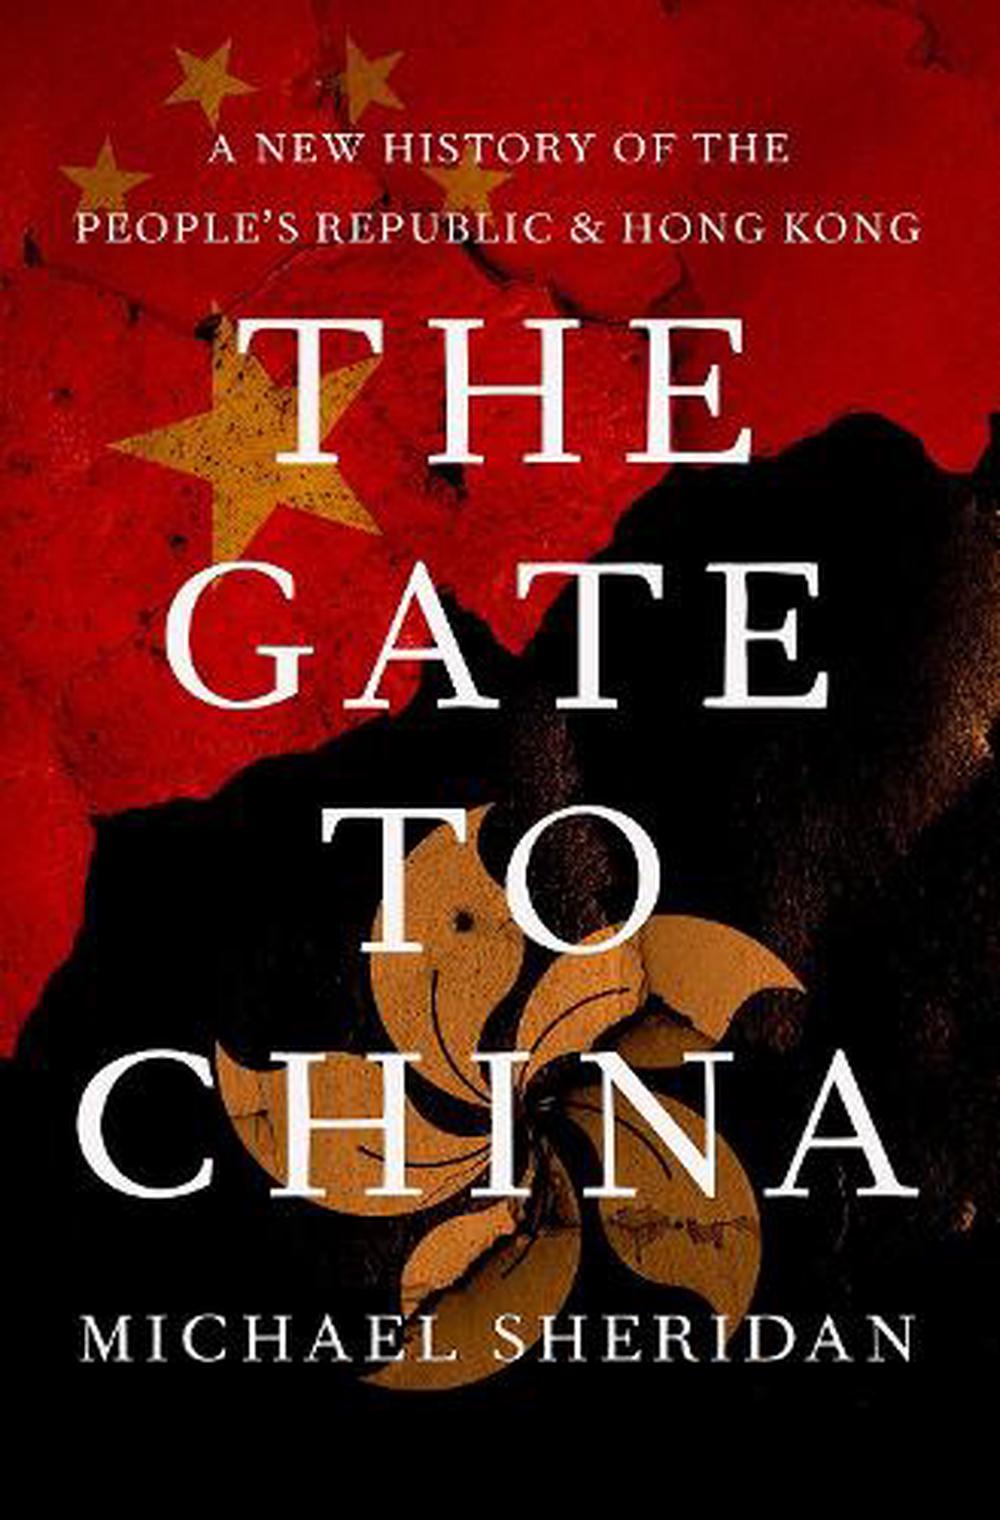 to　The　Gate　at　China　by　Buy　Hardcover,　Michael　Sheridan,　9780197576236　online　The　Nile